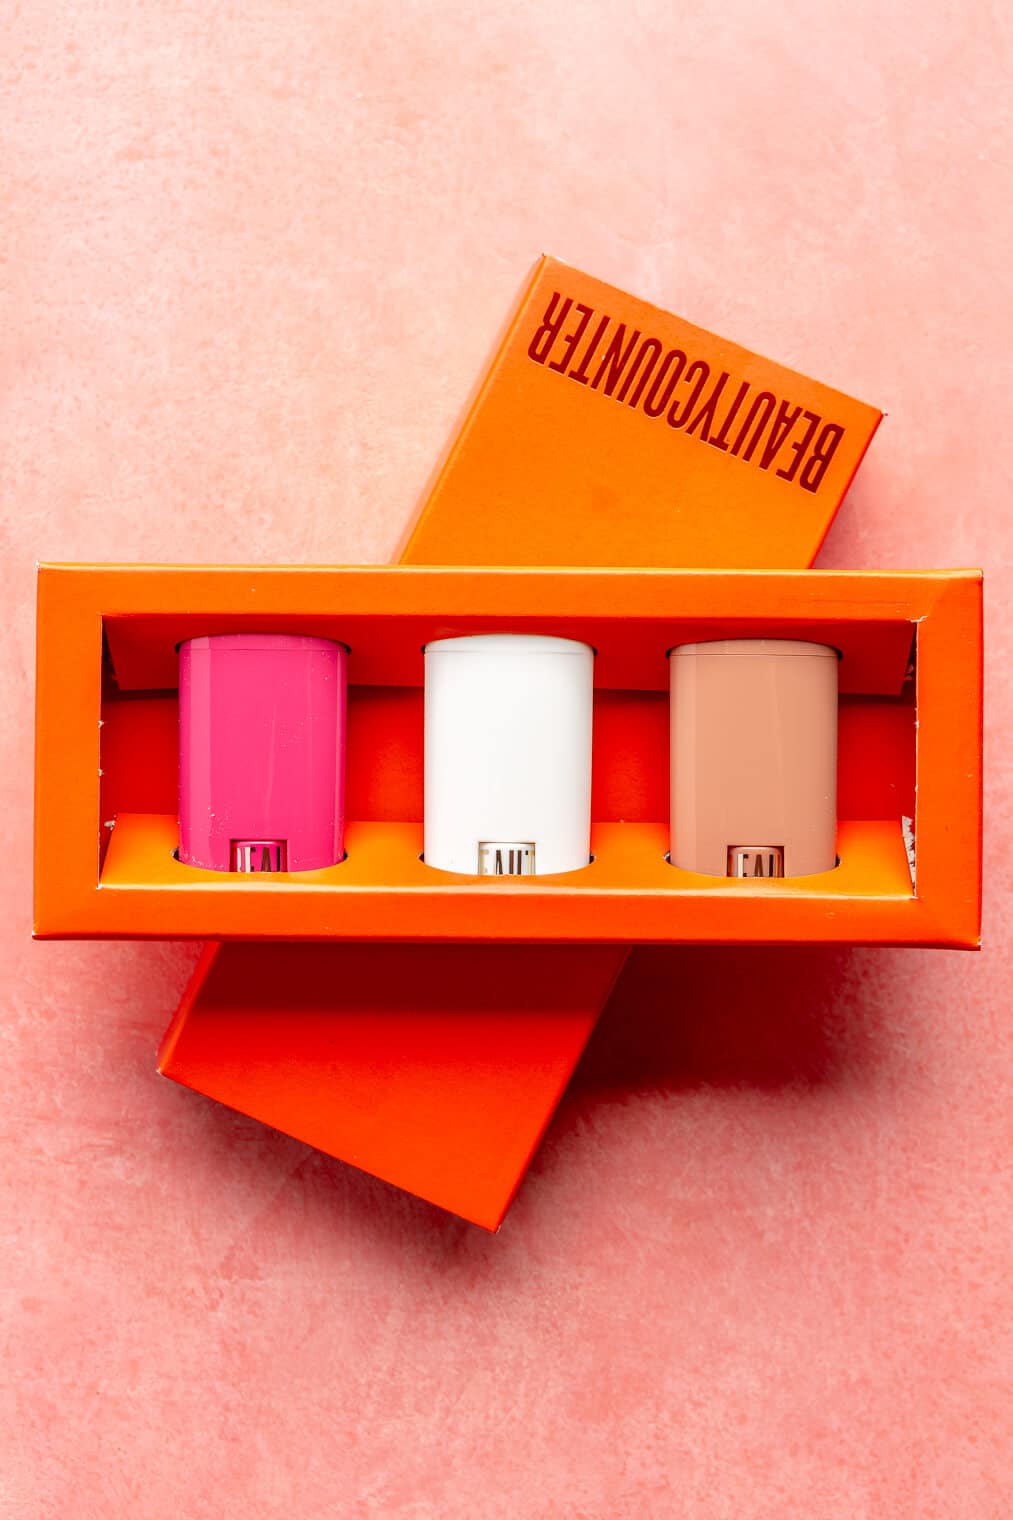 Three rectangle shaped lip balms in a bright red box sitting on a pink blush surface.